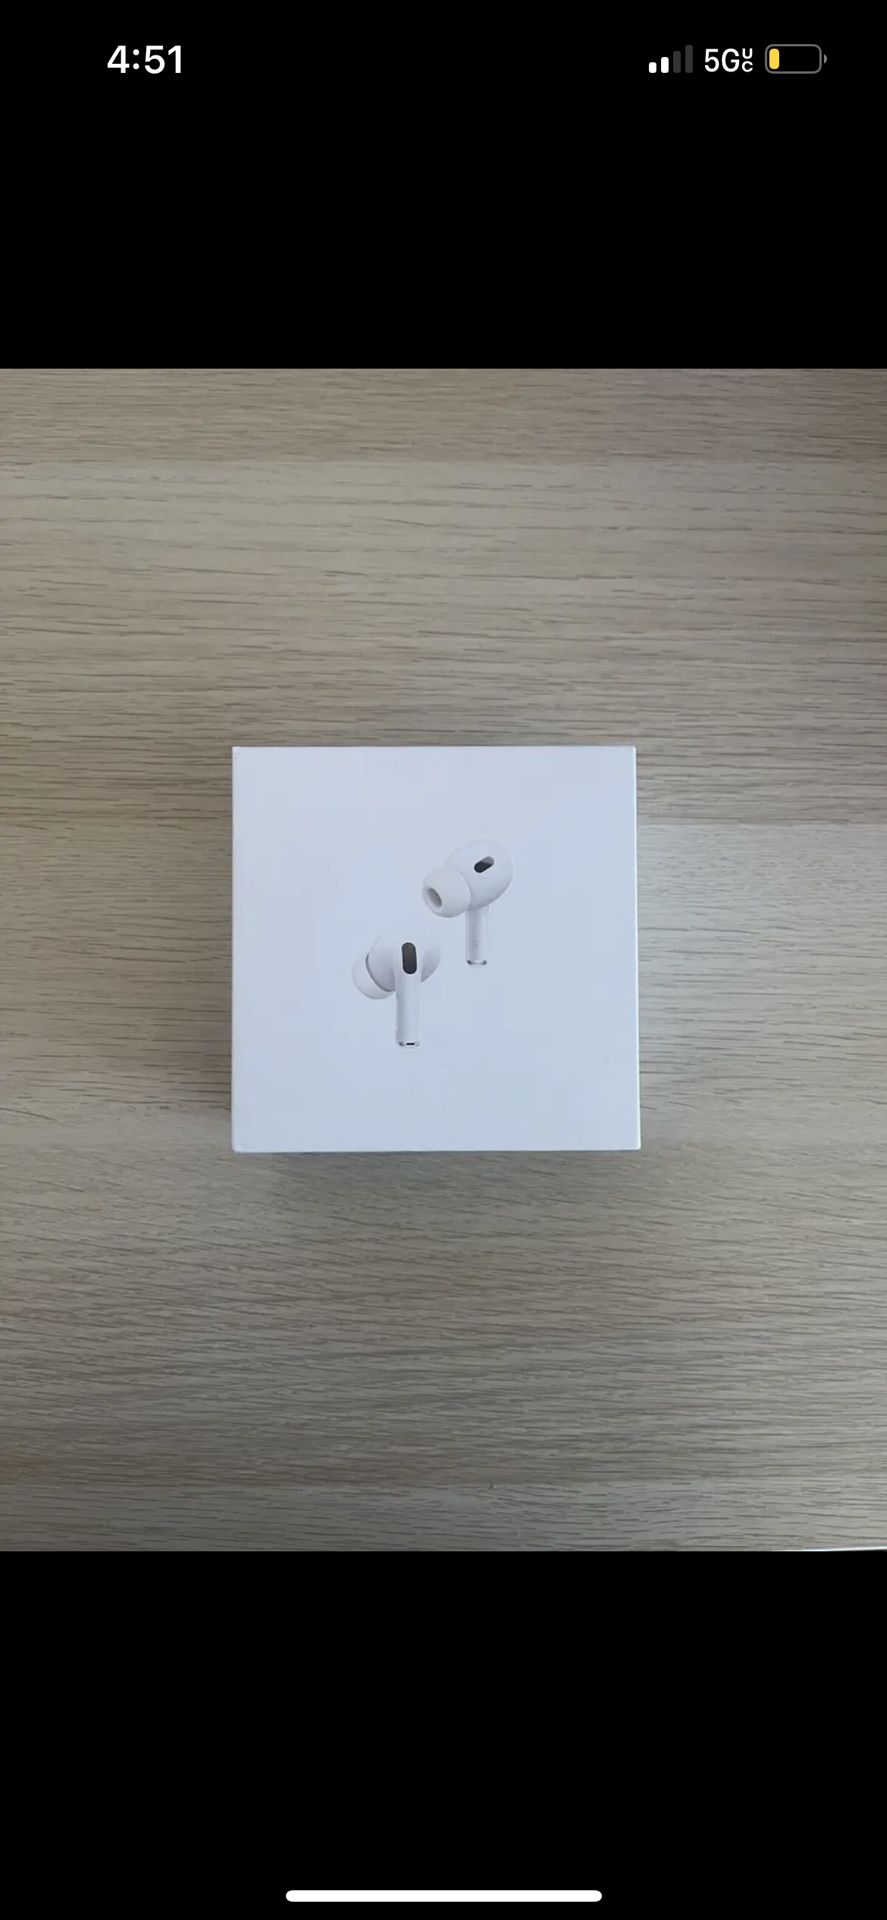 AirPods Pro 2nd Generation (Noise Cancellation)